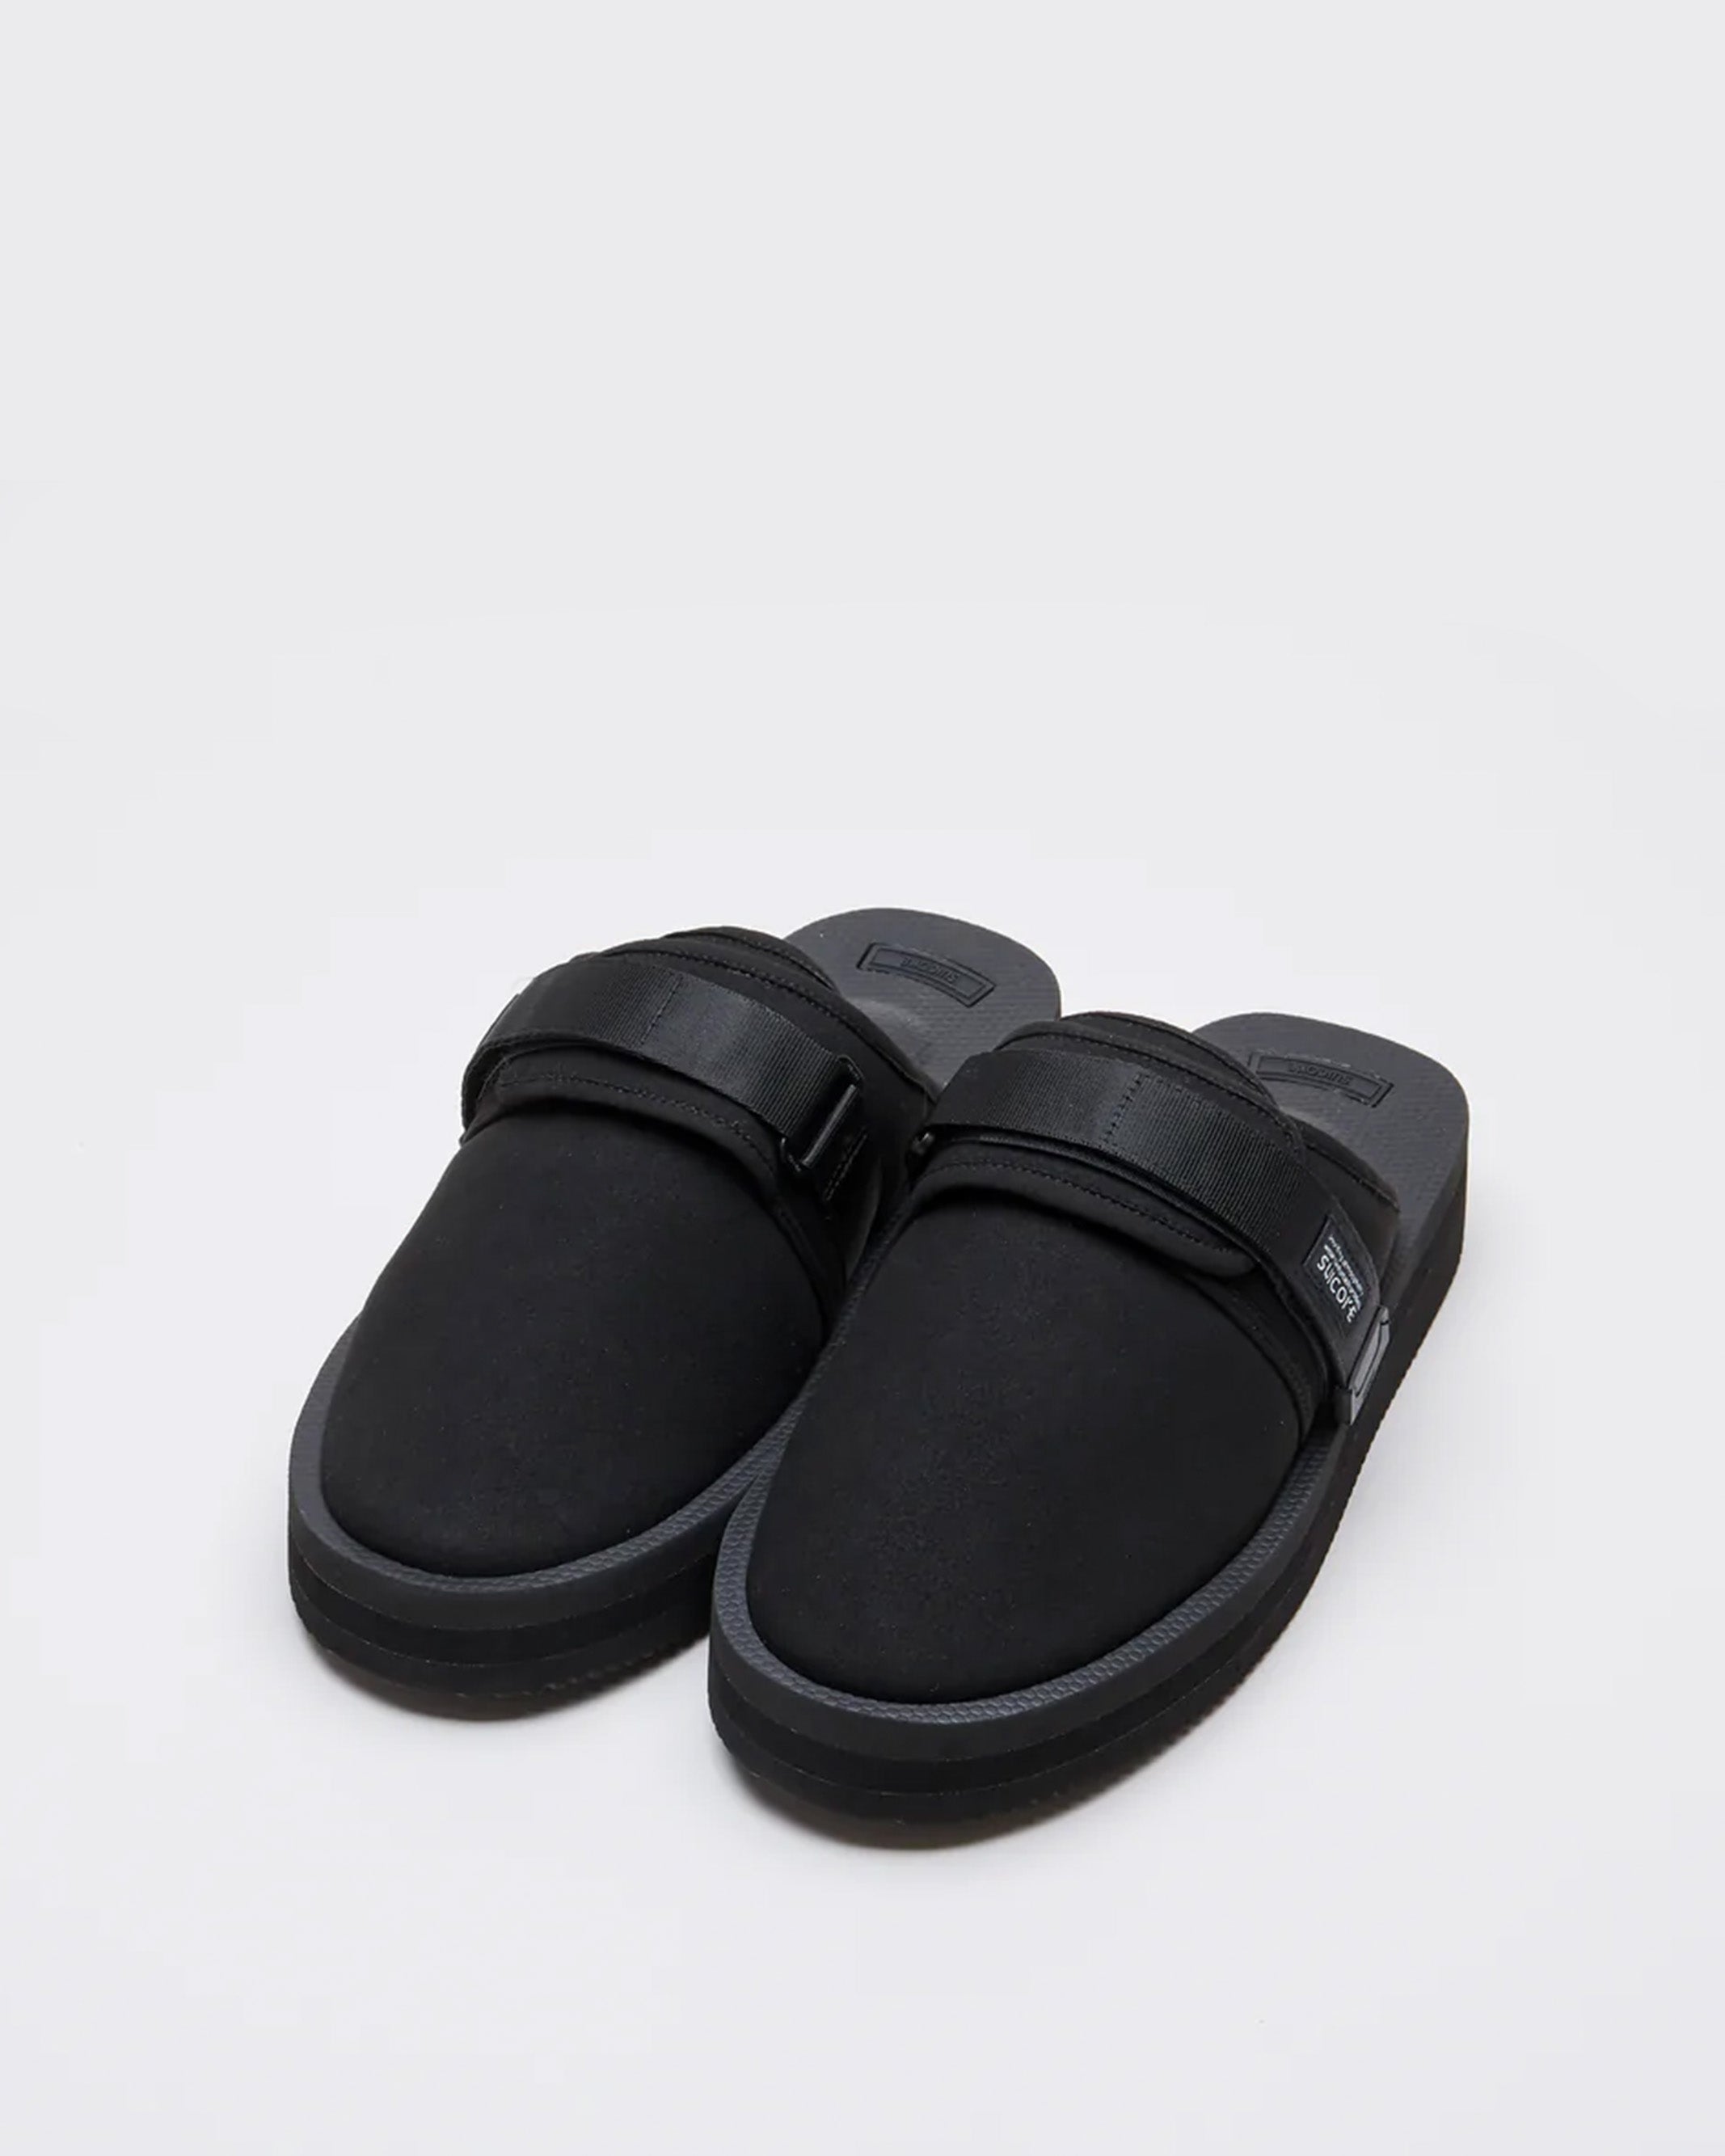 SUICOKE ZAVO-VPO in Black OG-072VPO | Shop from eightywingold an official brand partner for SUICOKE Canada and US.